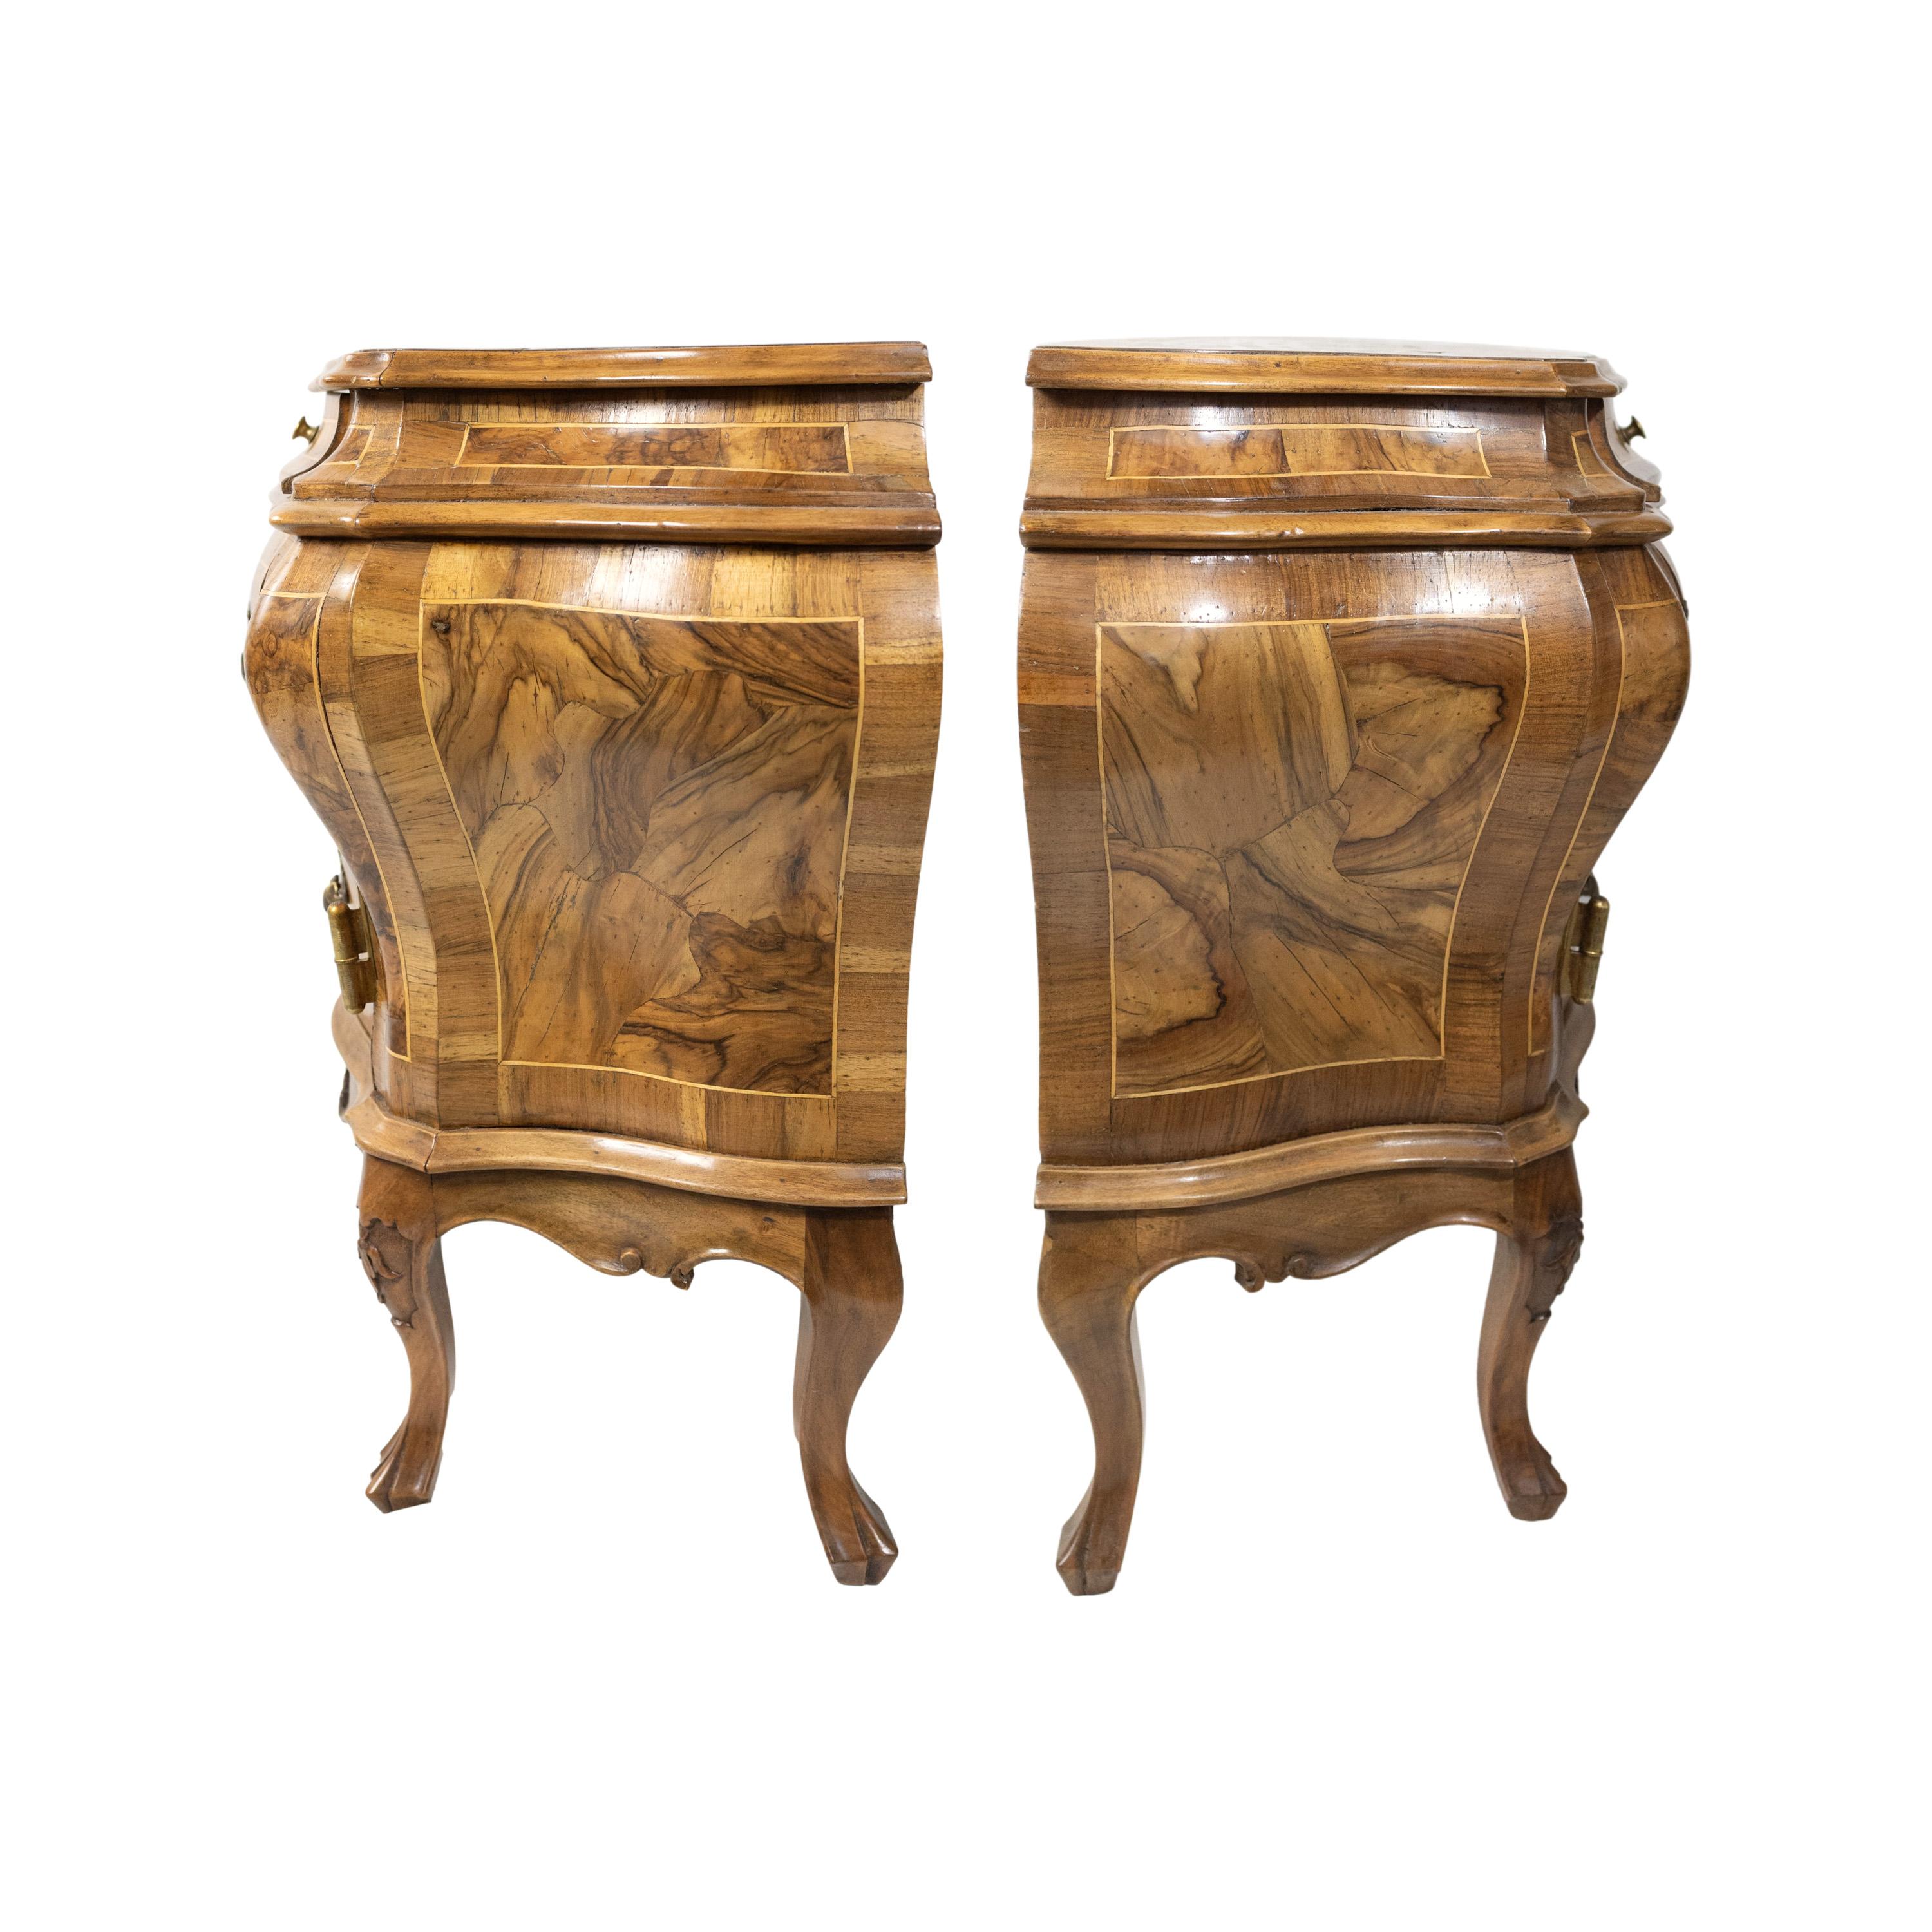 Hand-Crafted Pair of Olive Wood Bombé Commodes/Side Cabinets, Italian, ca. 1880